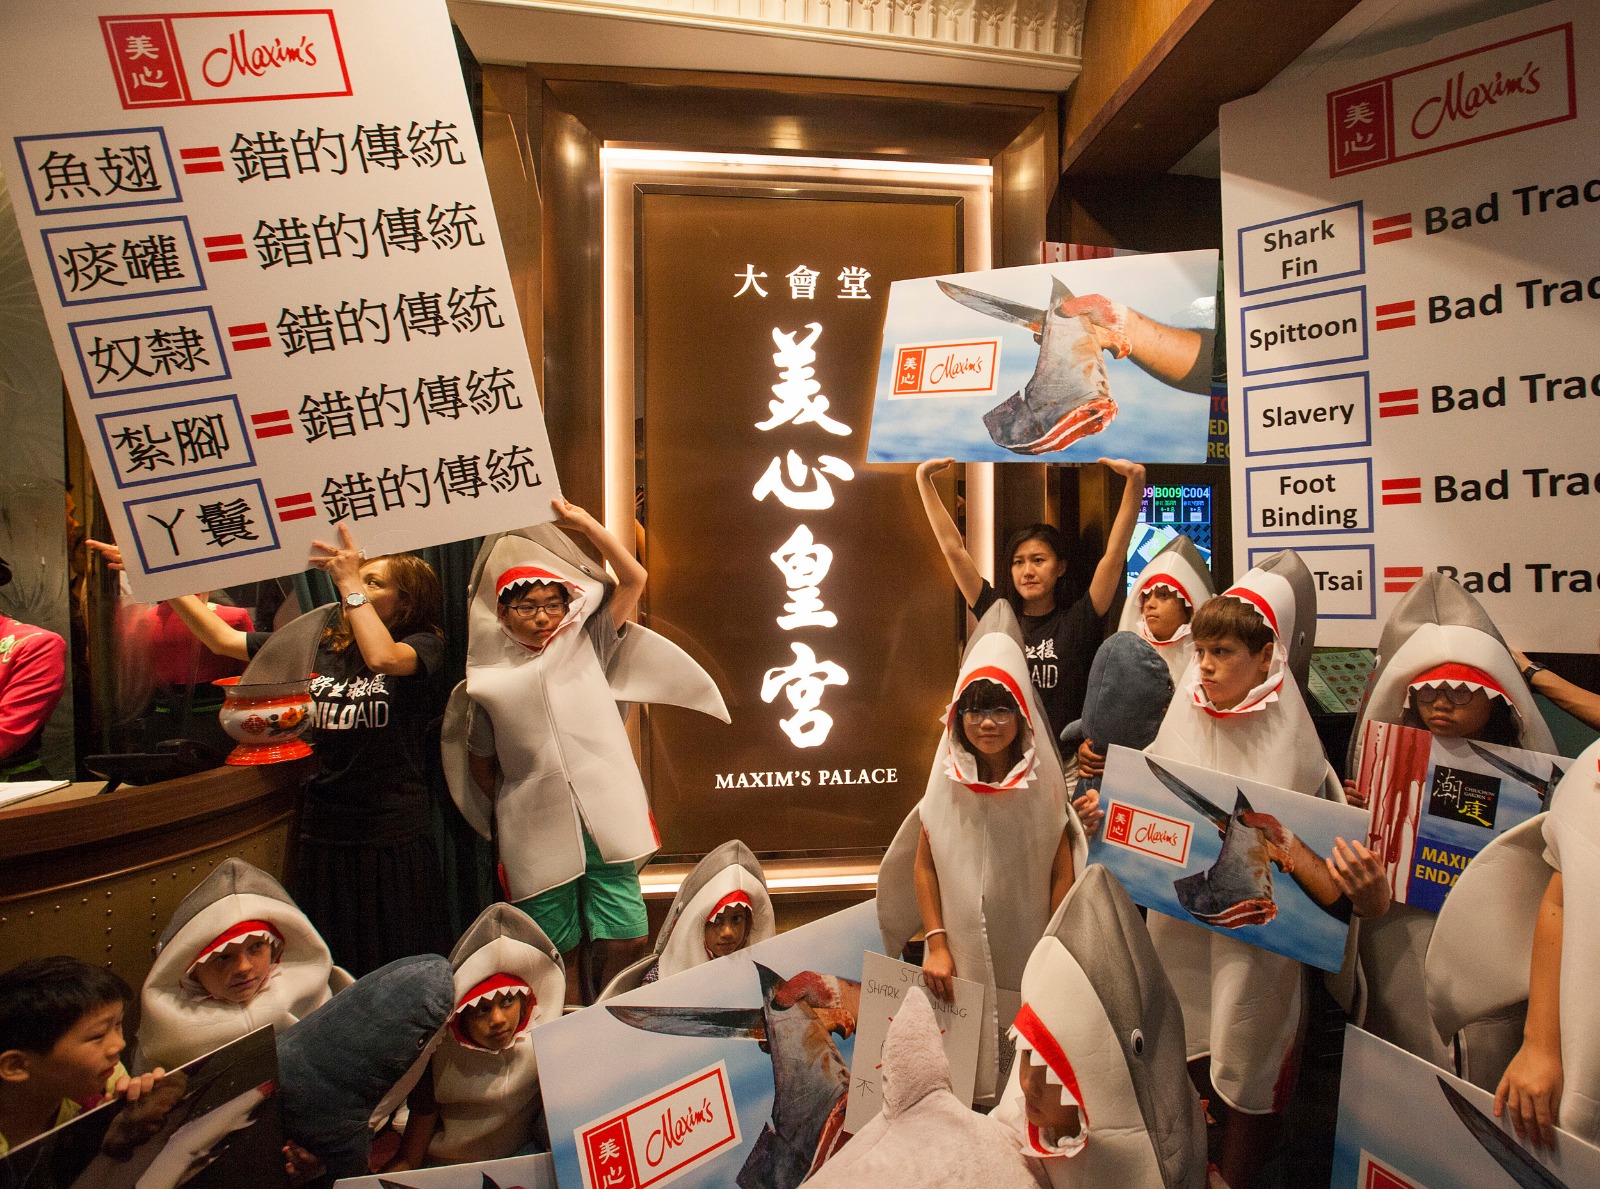 WildAid activists demonstrate against the shark fin trade outside a Maxim's restaurant in Central, Hong Kong (Image: Alex Hofford)